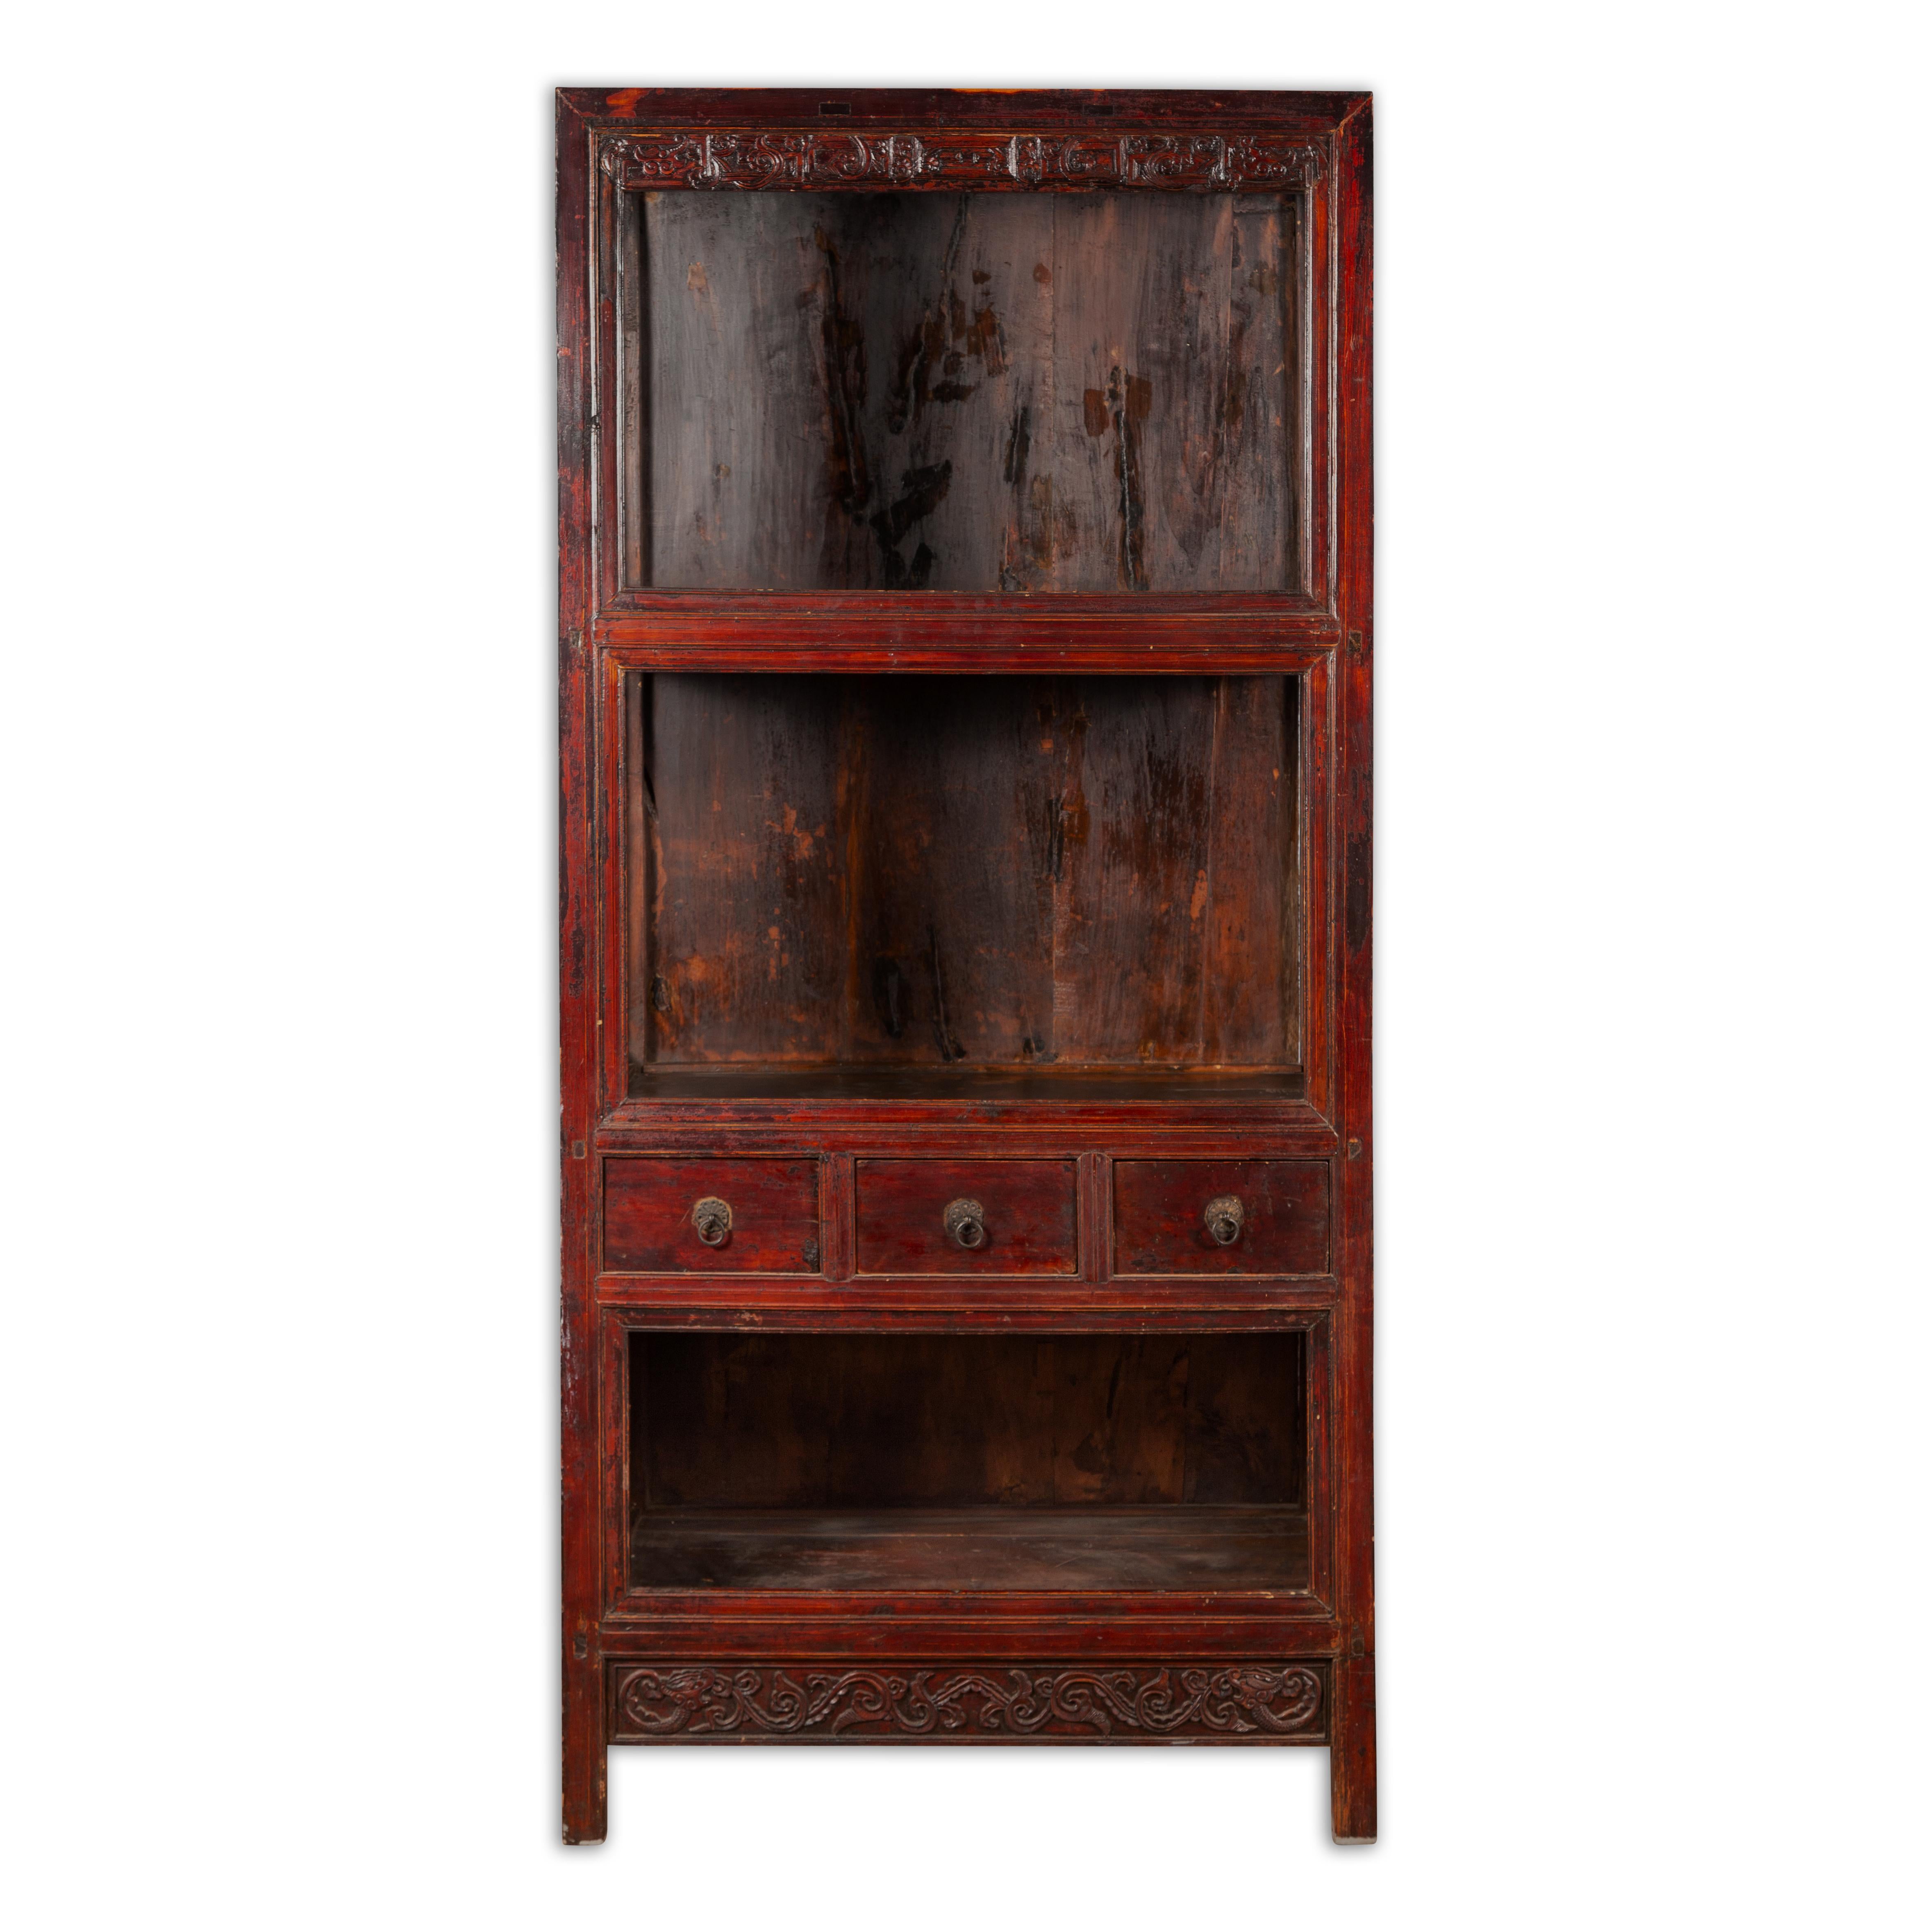 Chinese Qing Dynasty 19th Century Lacquered Cabinet with Carved Dragon Motifs For Sale 11